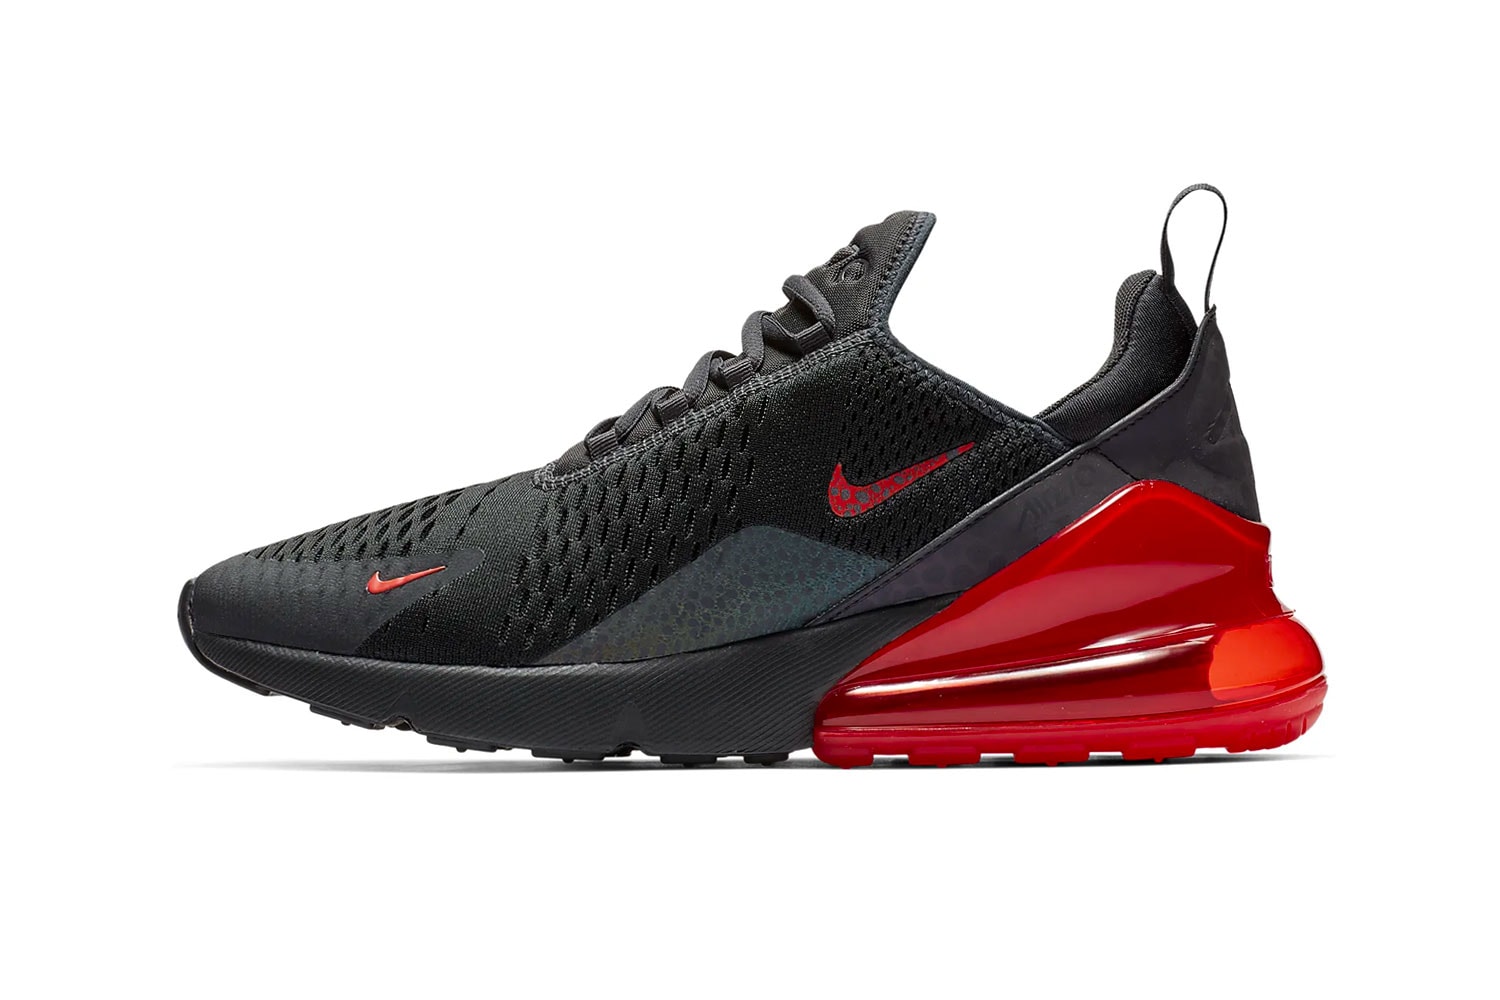 Nike Air Max 270 Reflective Black Red Release Info Date 